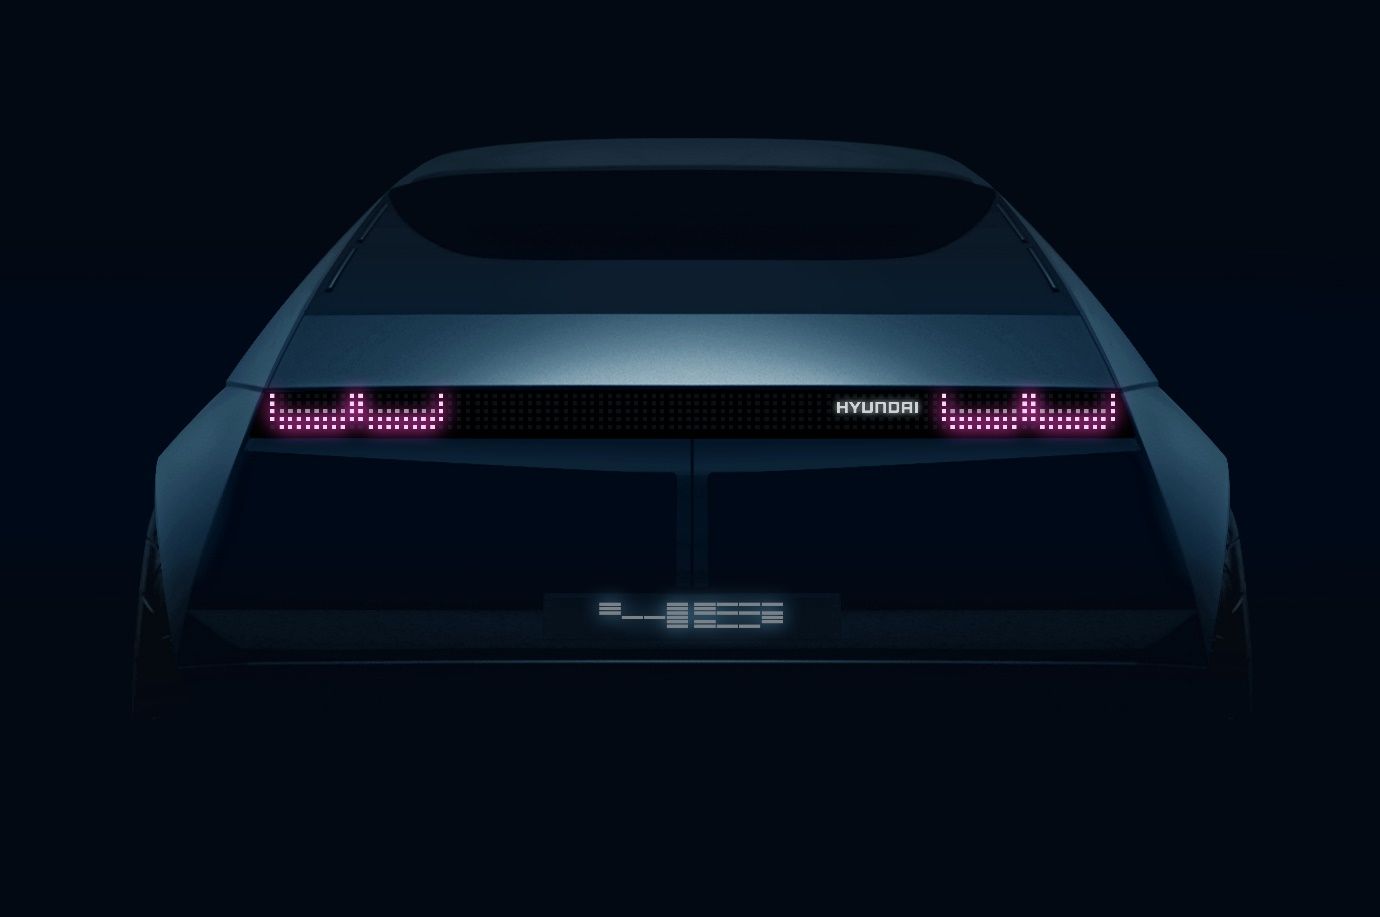 Hyundai teases new electric vehicle concept for Frankfurt Motor Show